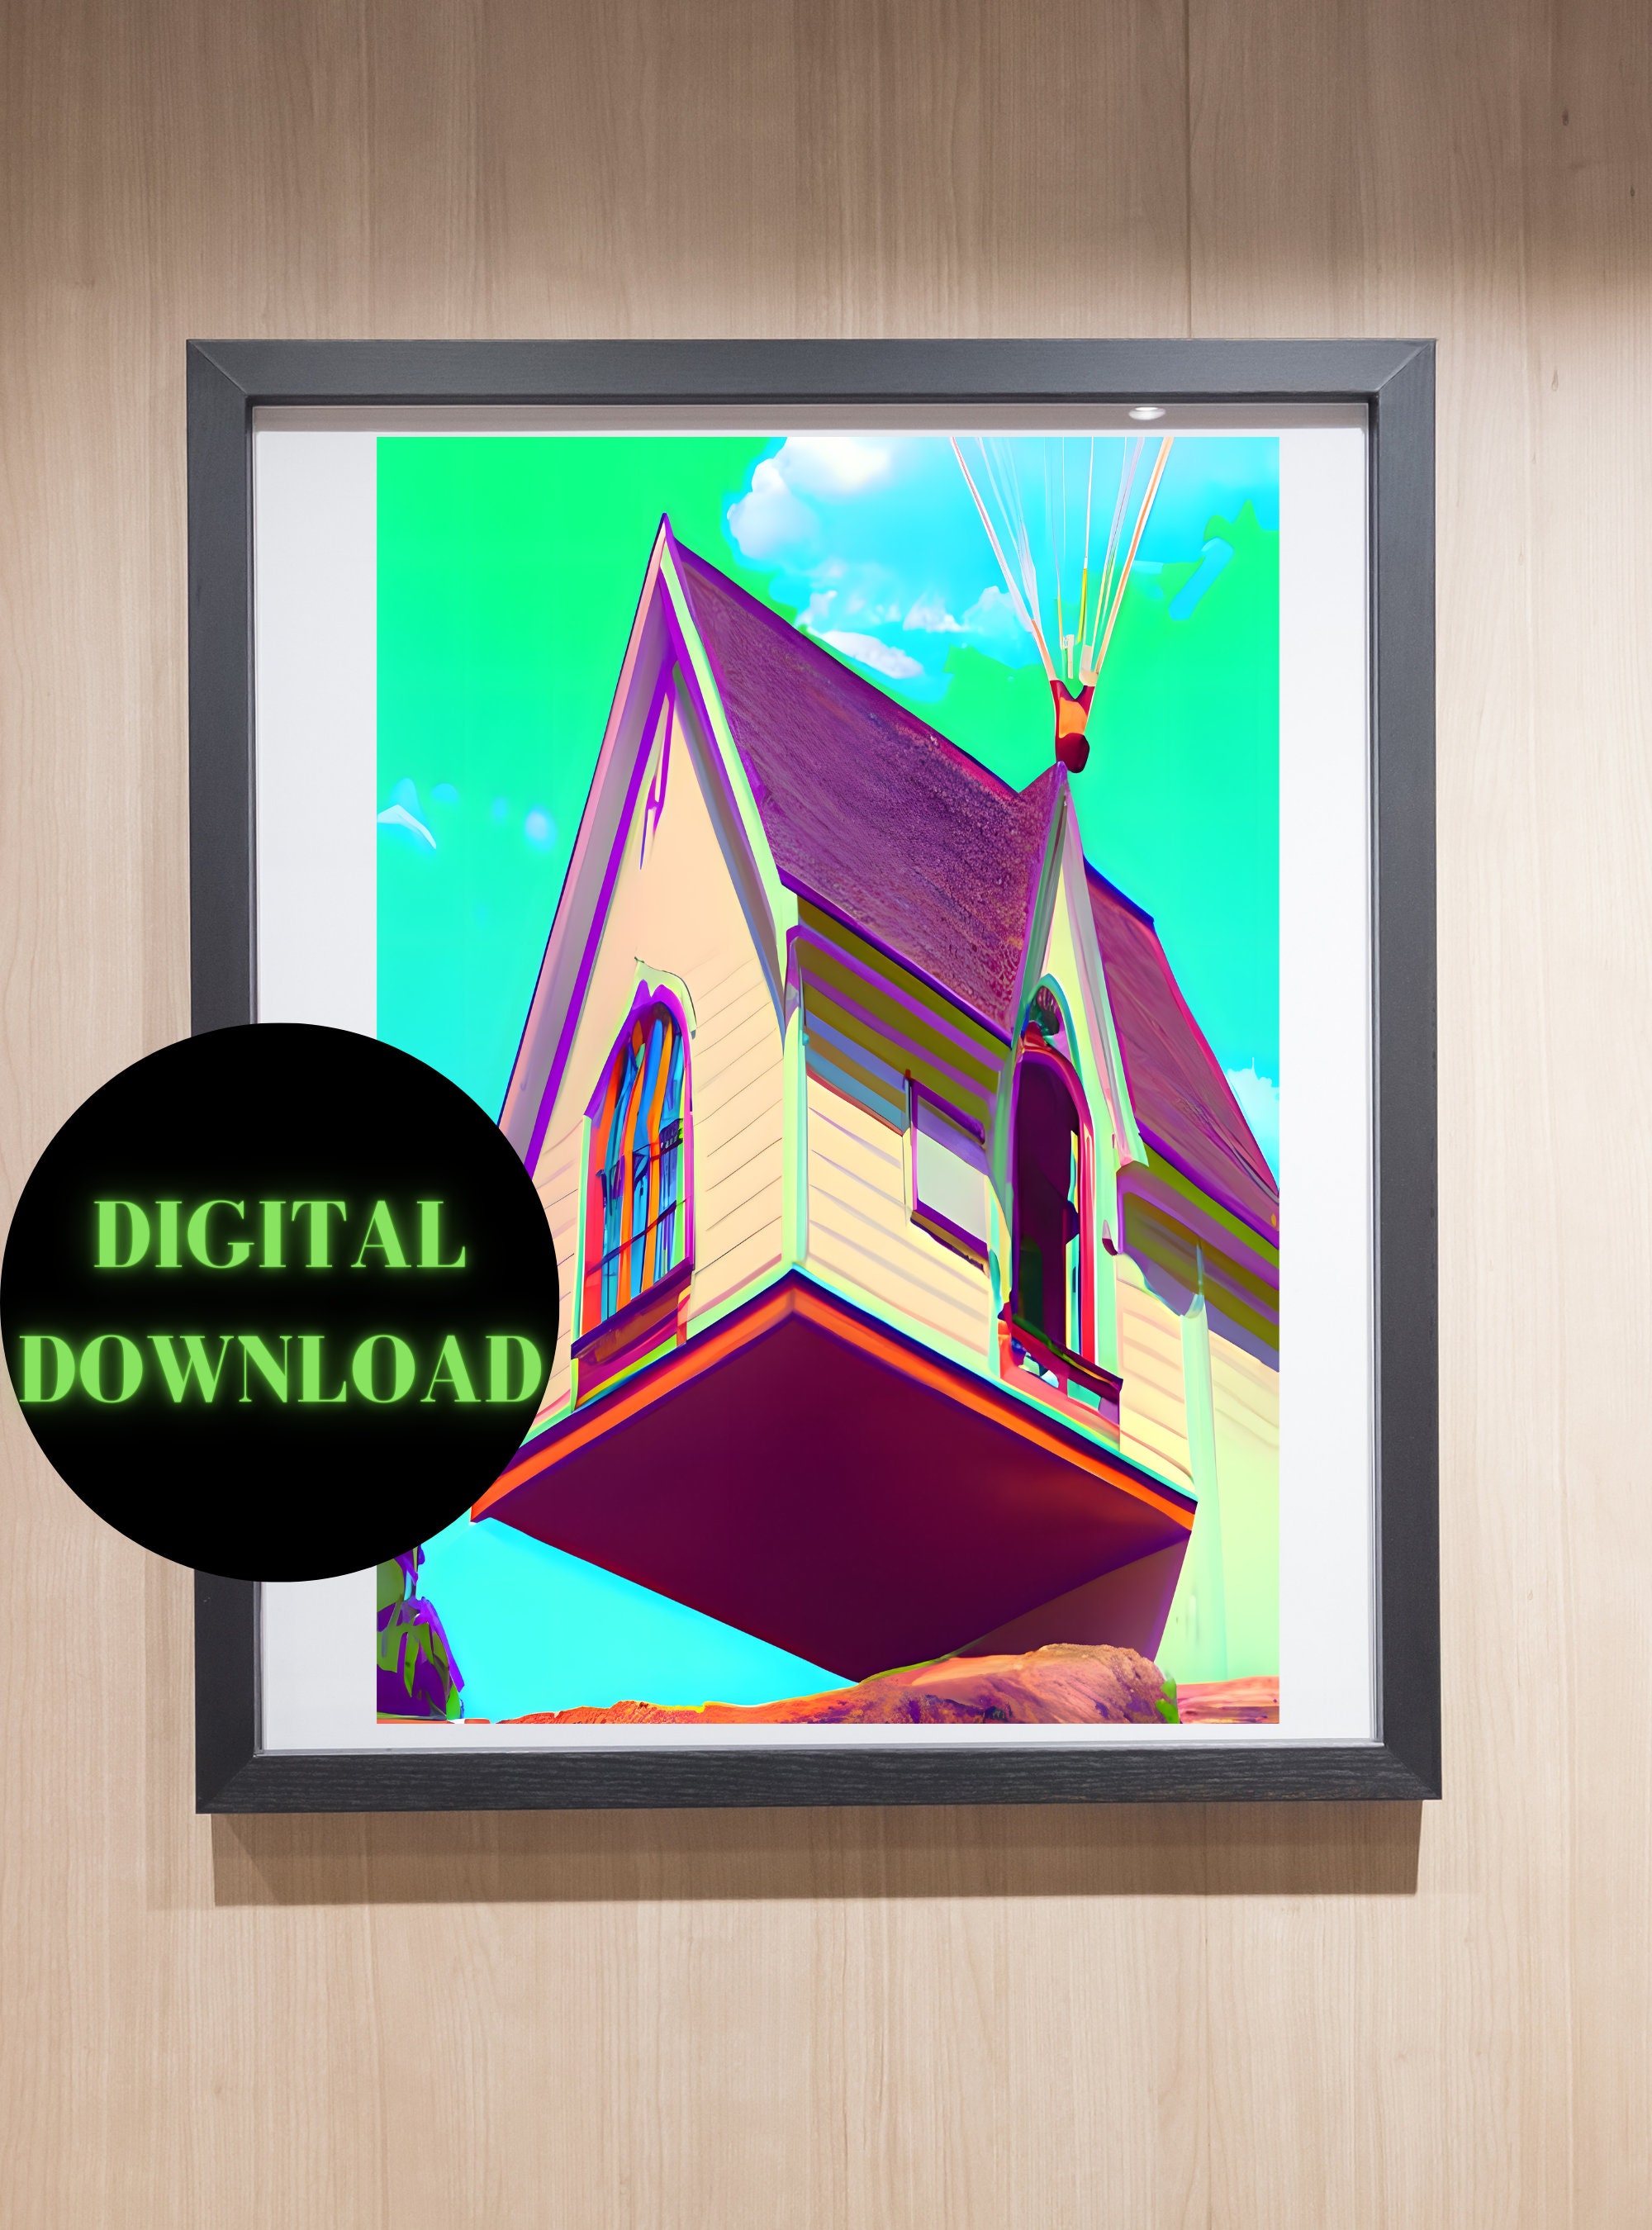 Dreamcore Flying House Aesthetic Home Decor and Digital 